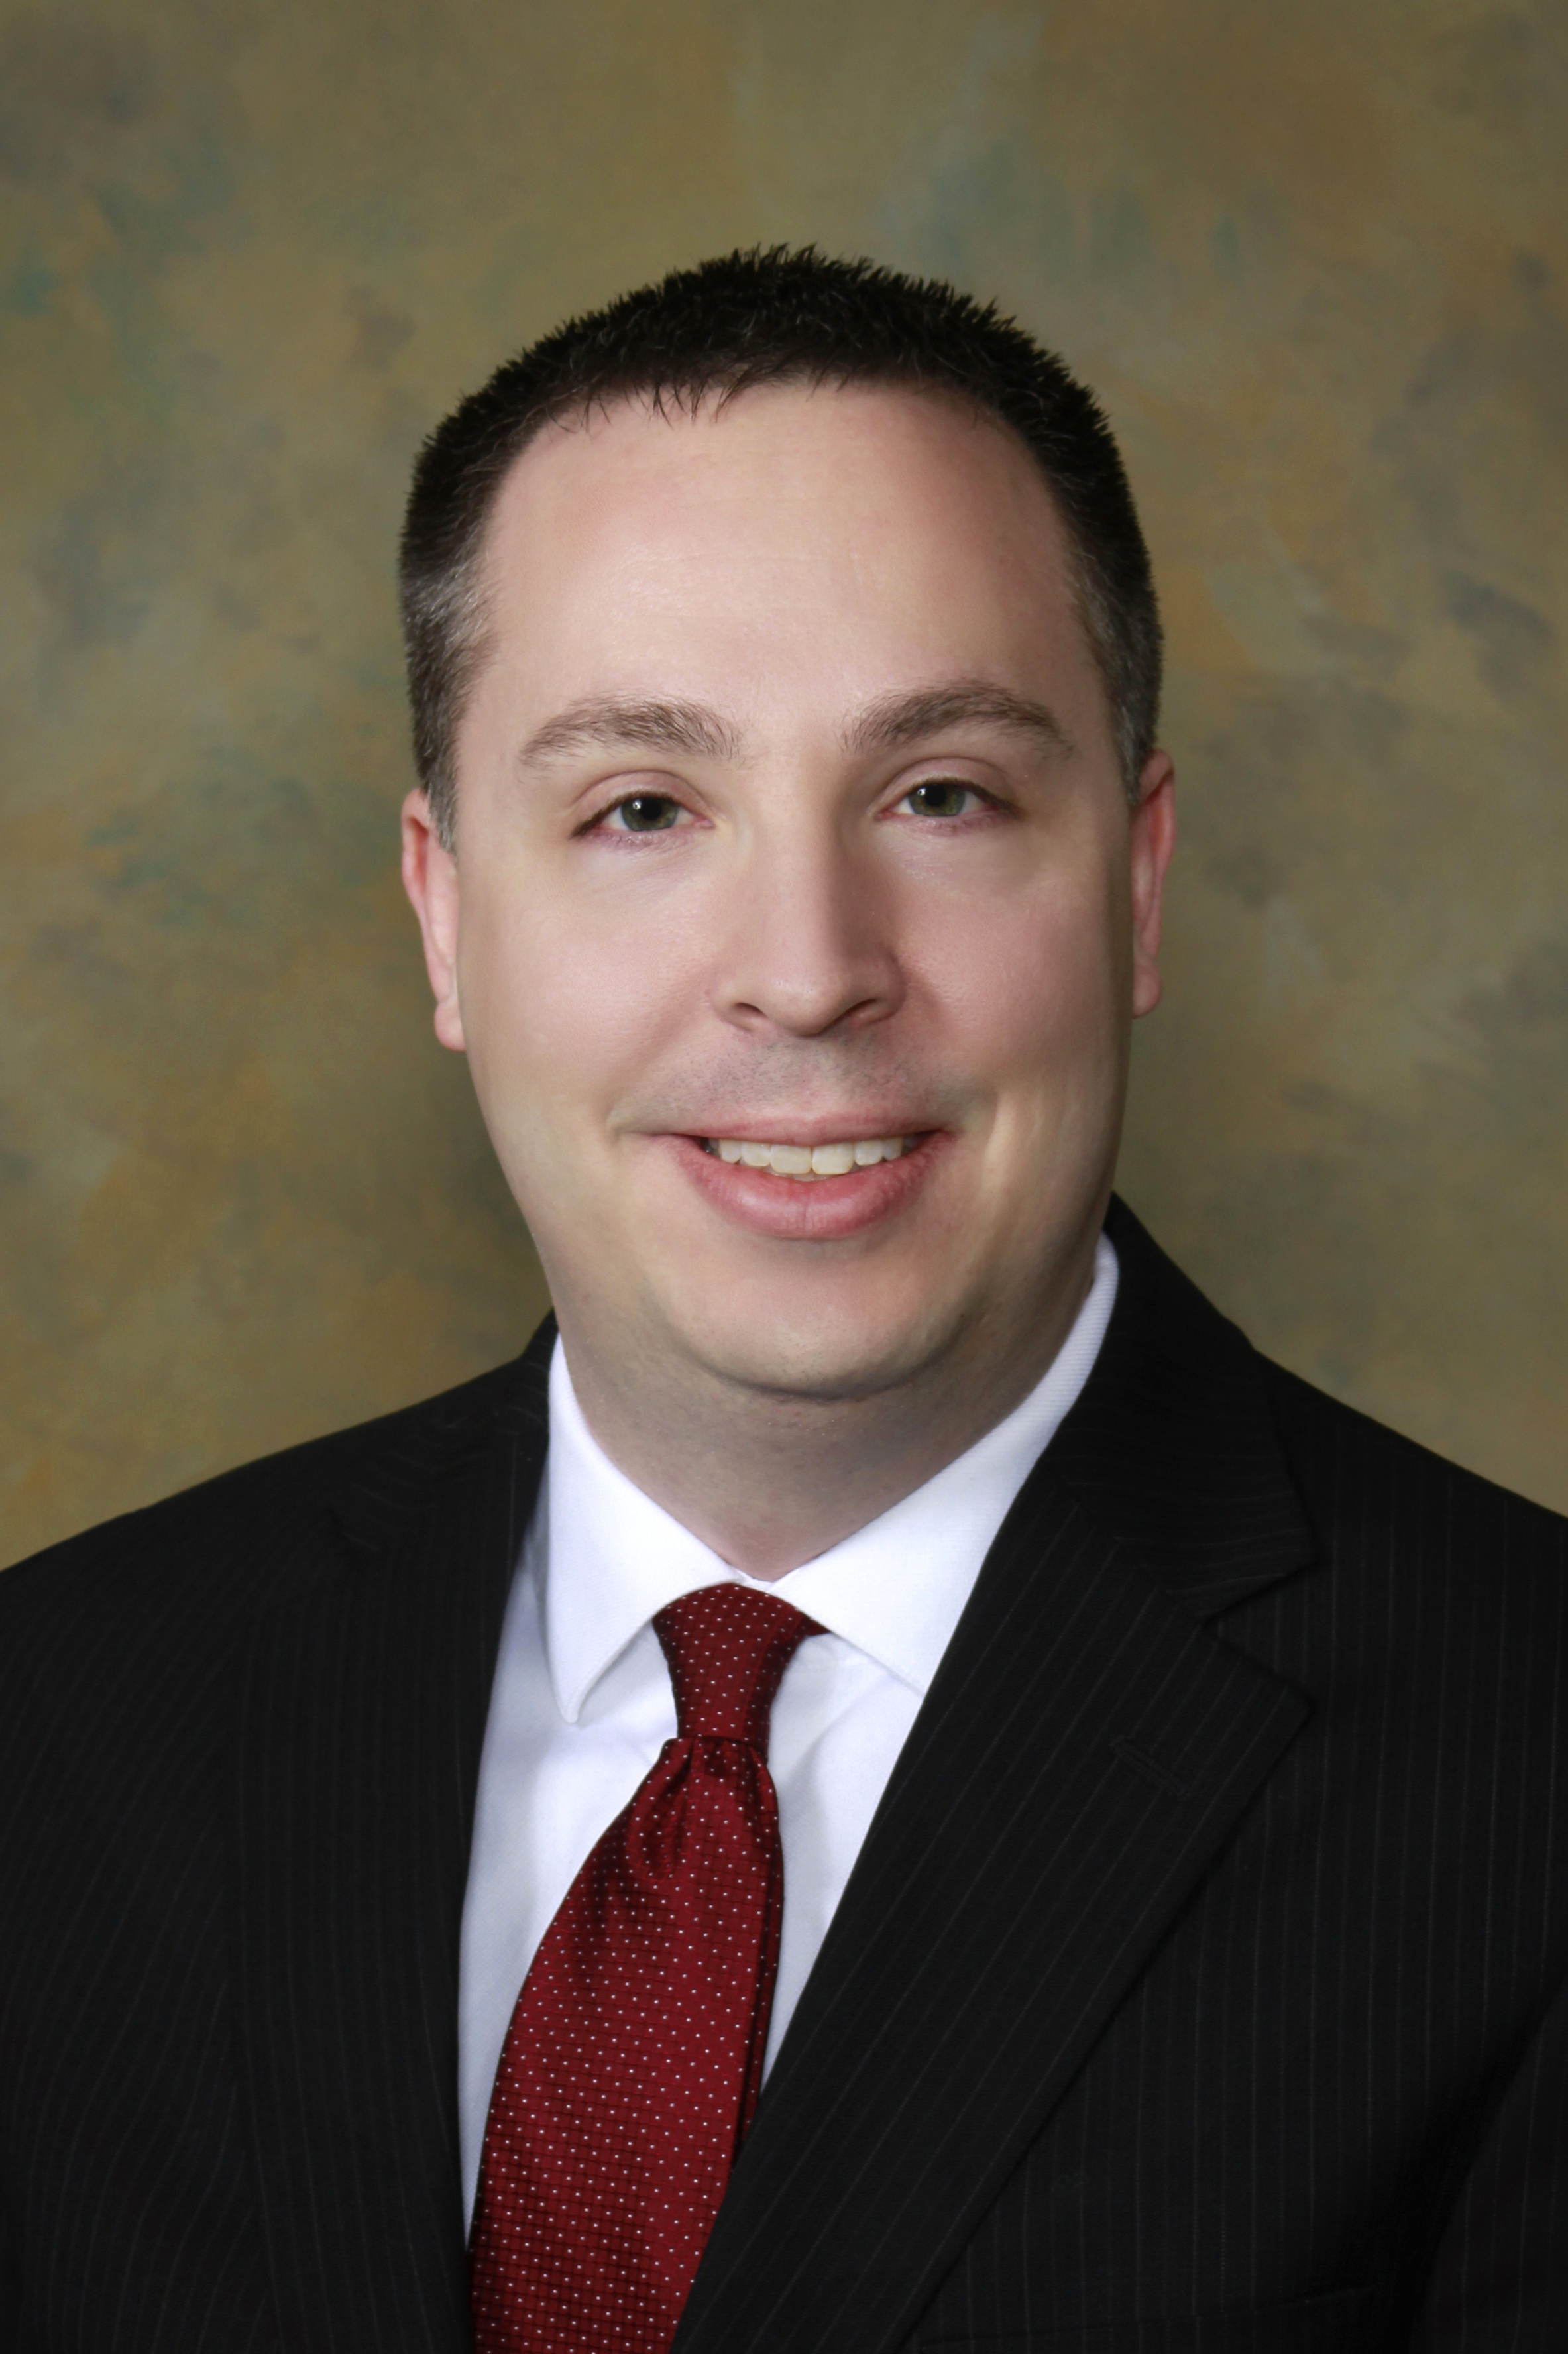 DUI Attorney Andrew Hoverman - Washington County, MD - DUIAttorney.com